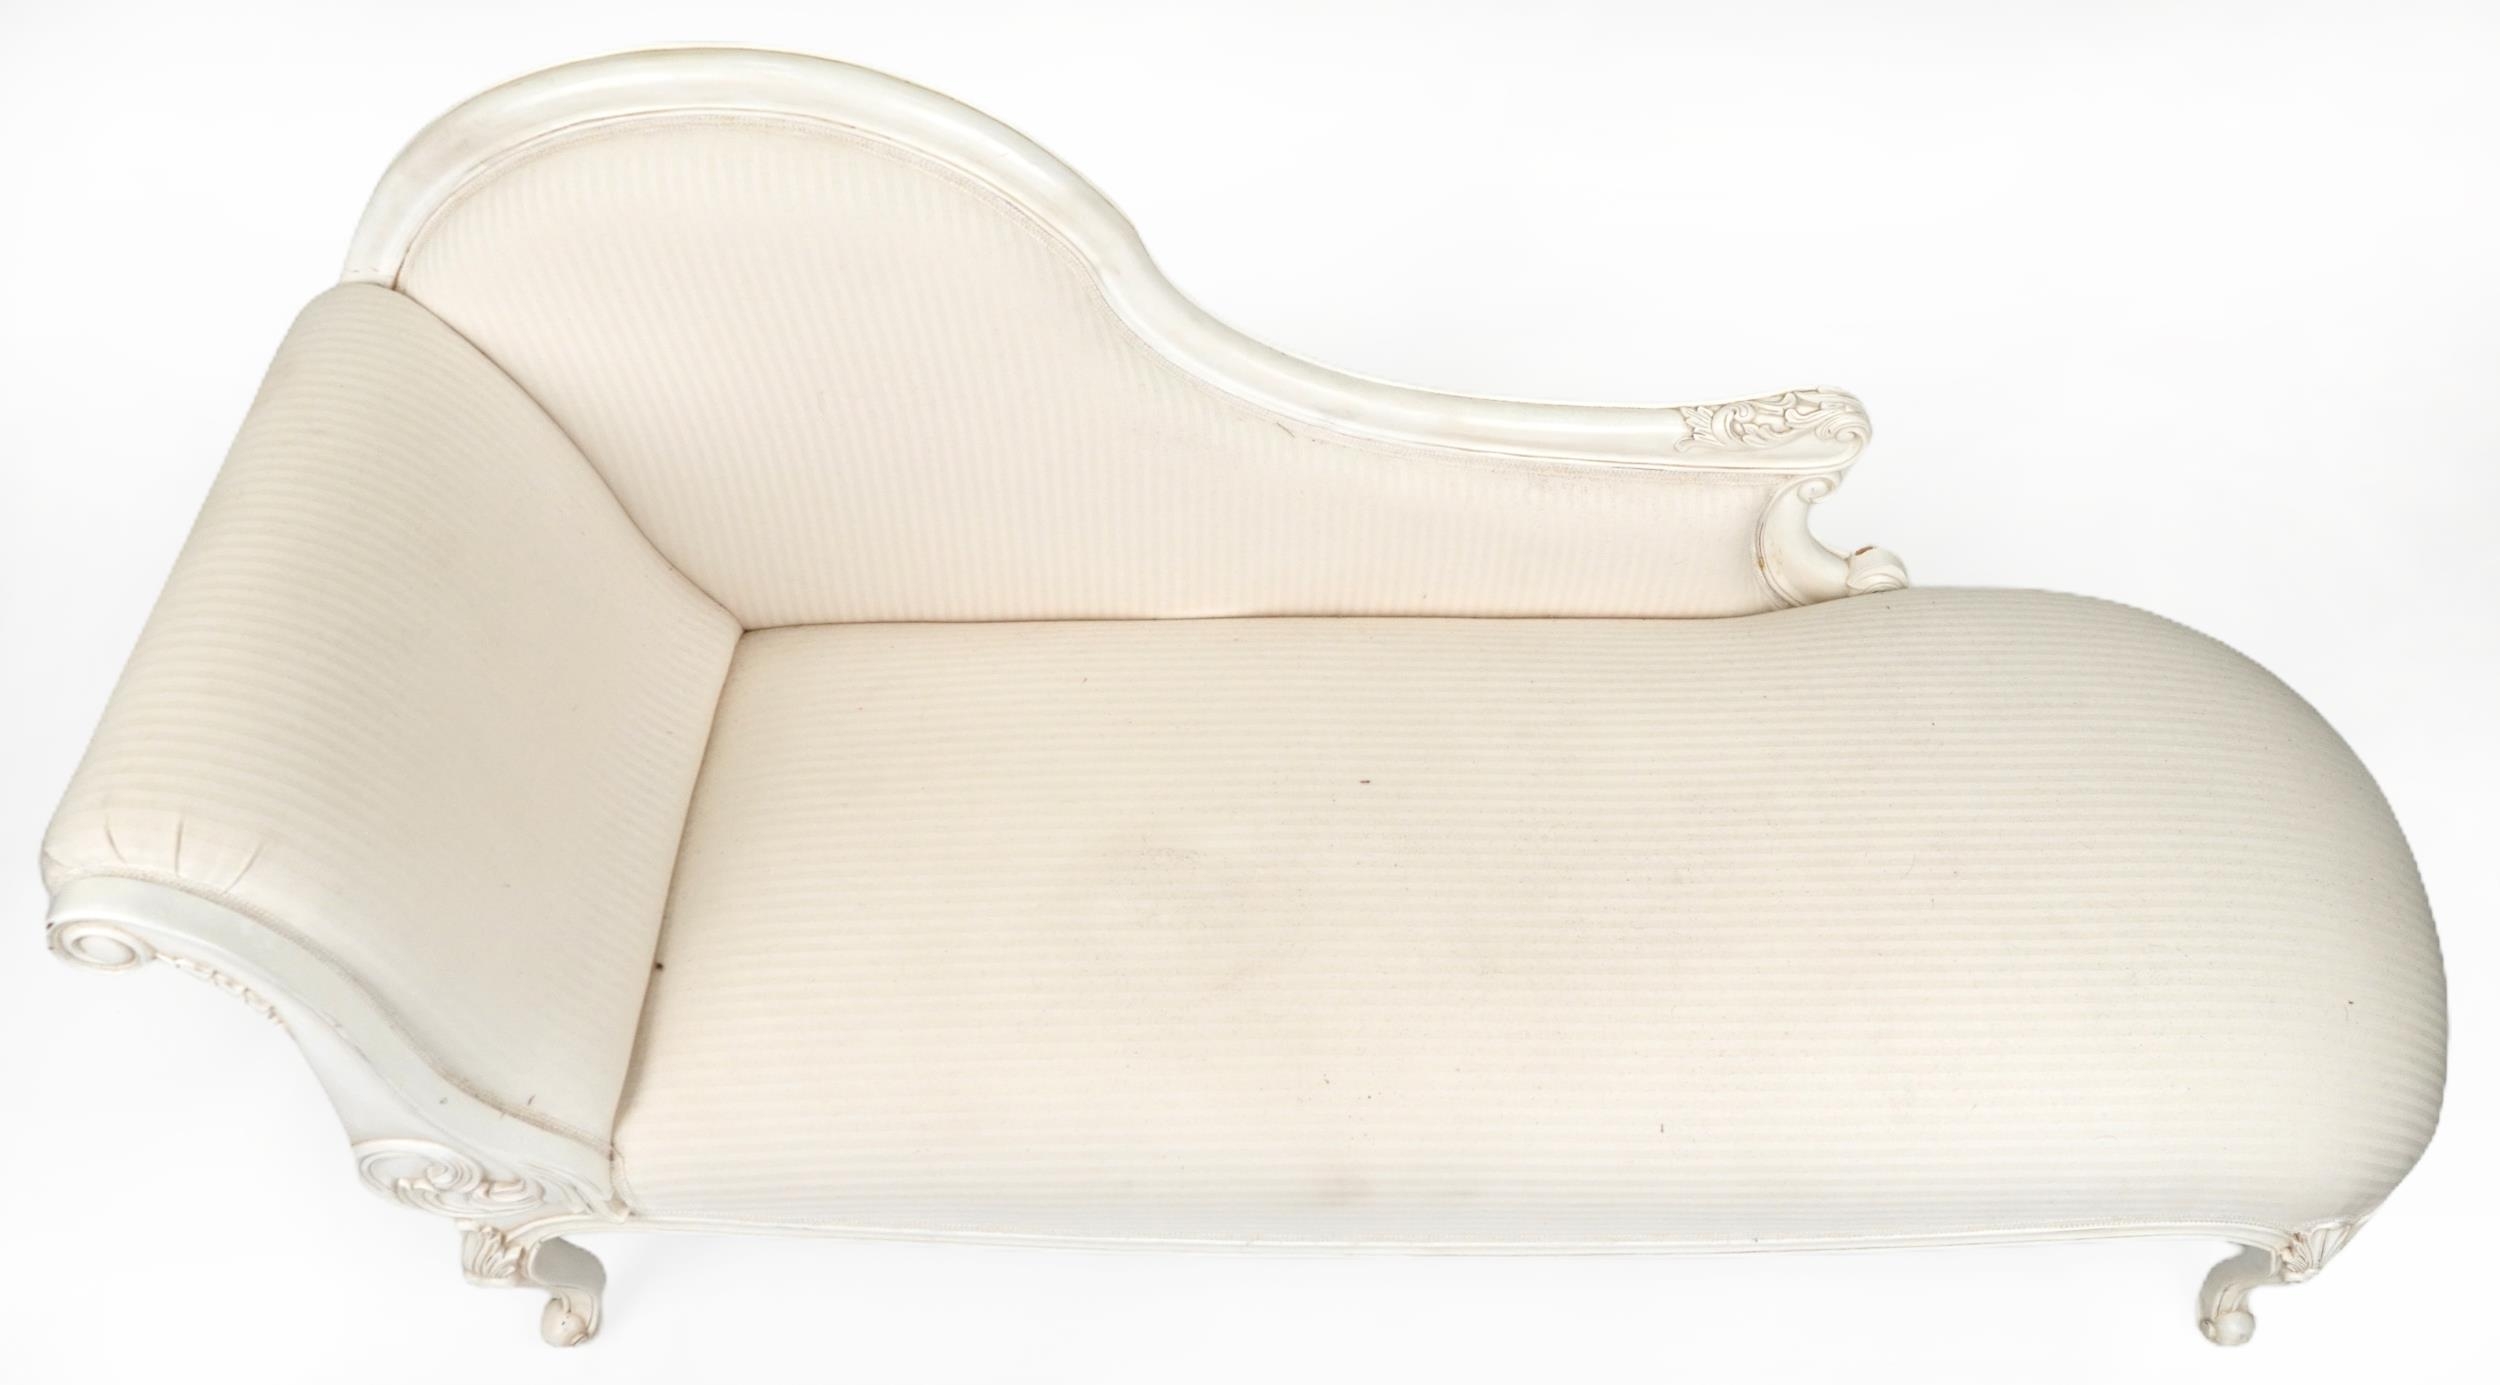 Contemporary French style chaise longue with striped cream upholstery on carved cabriole legs with - Image 3 of 4